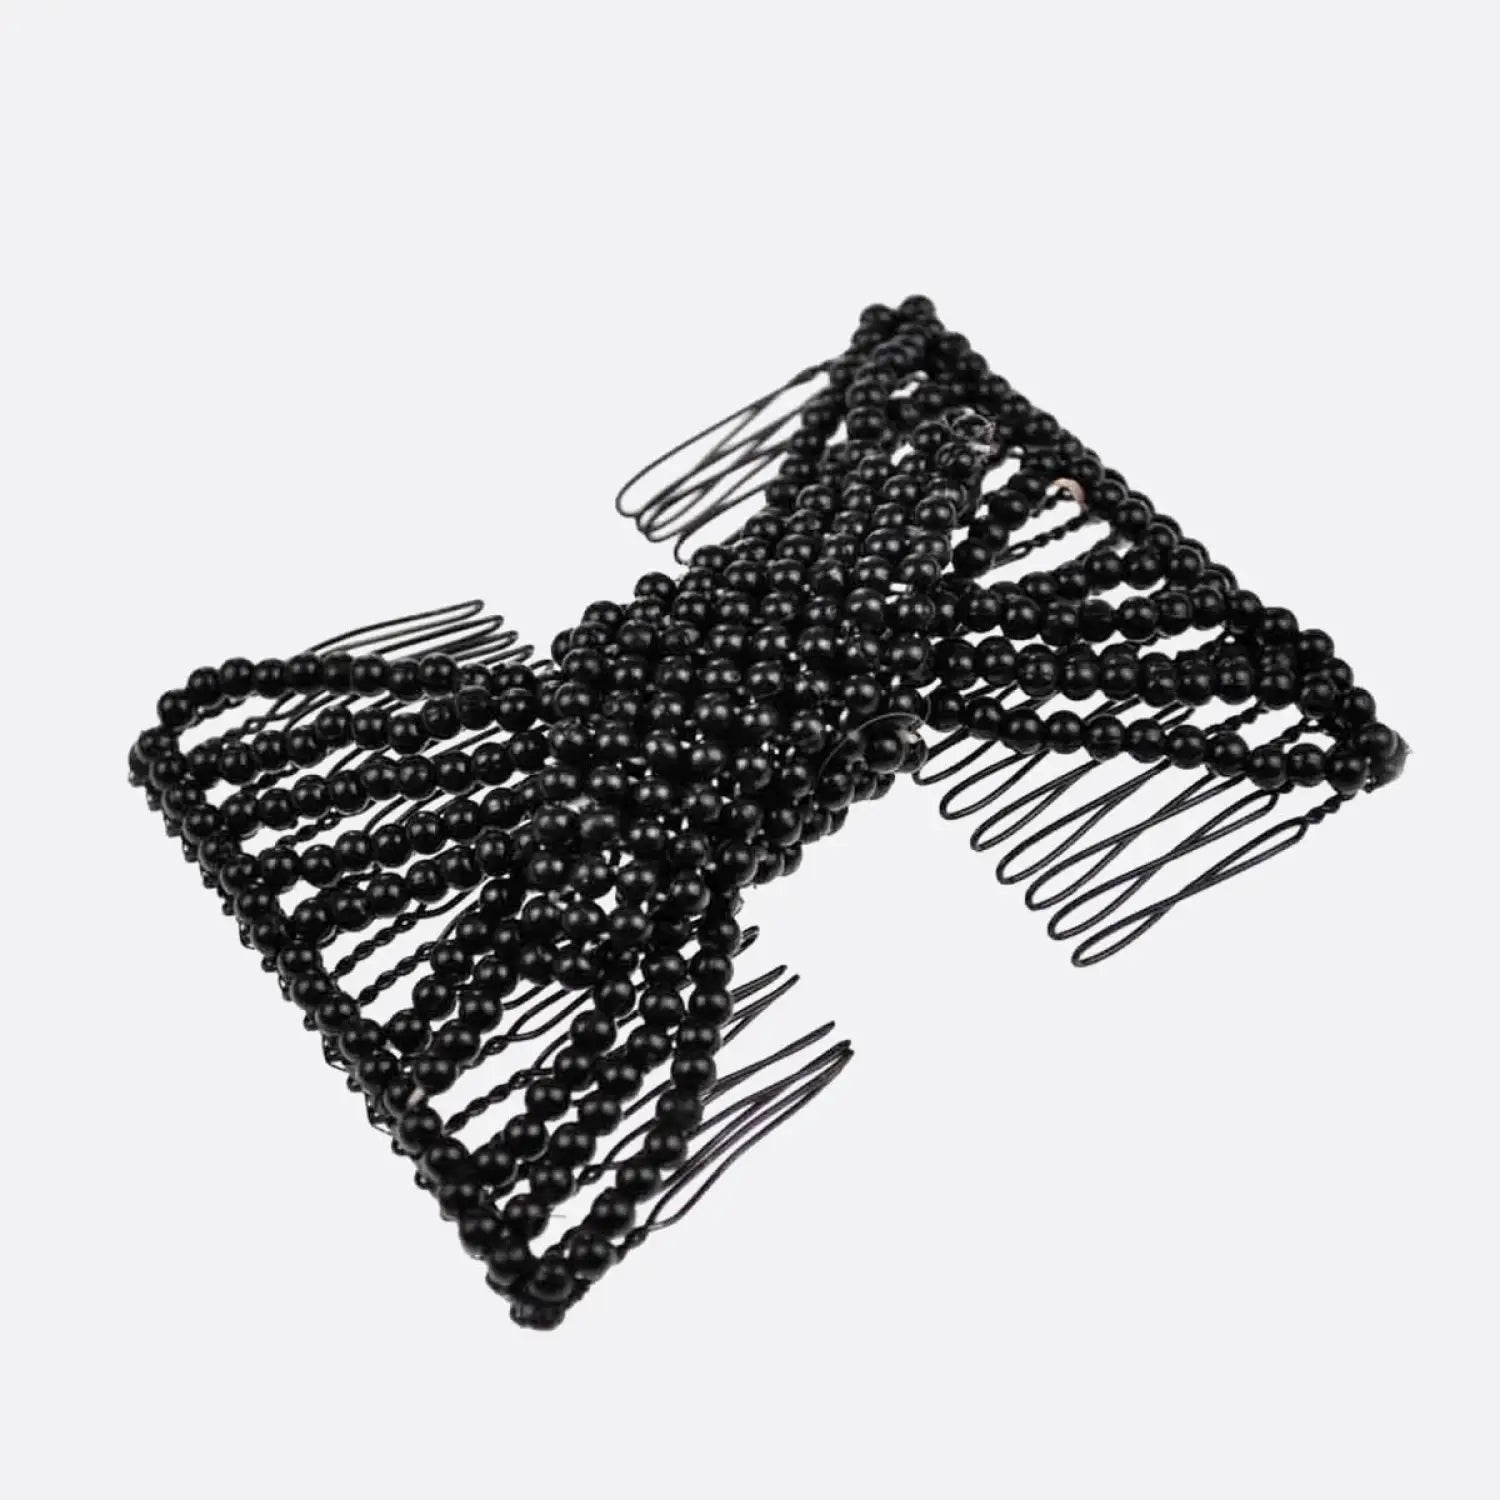 Black bead hair comb accessory in Pearl Beads Hair Combs product display.